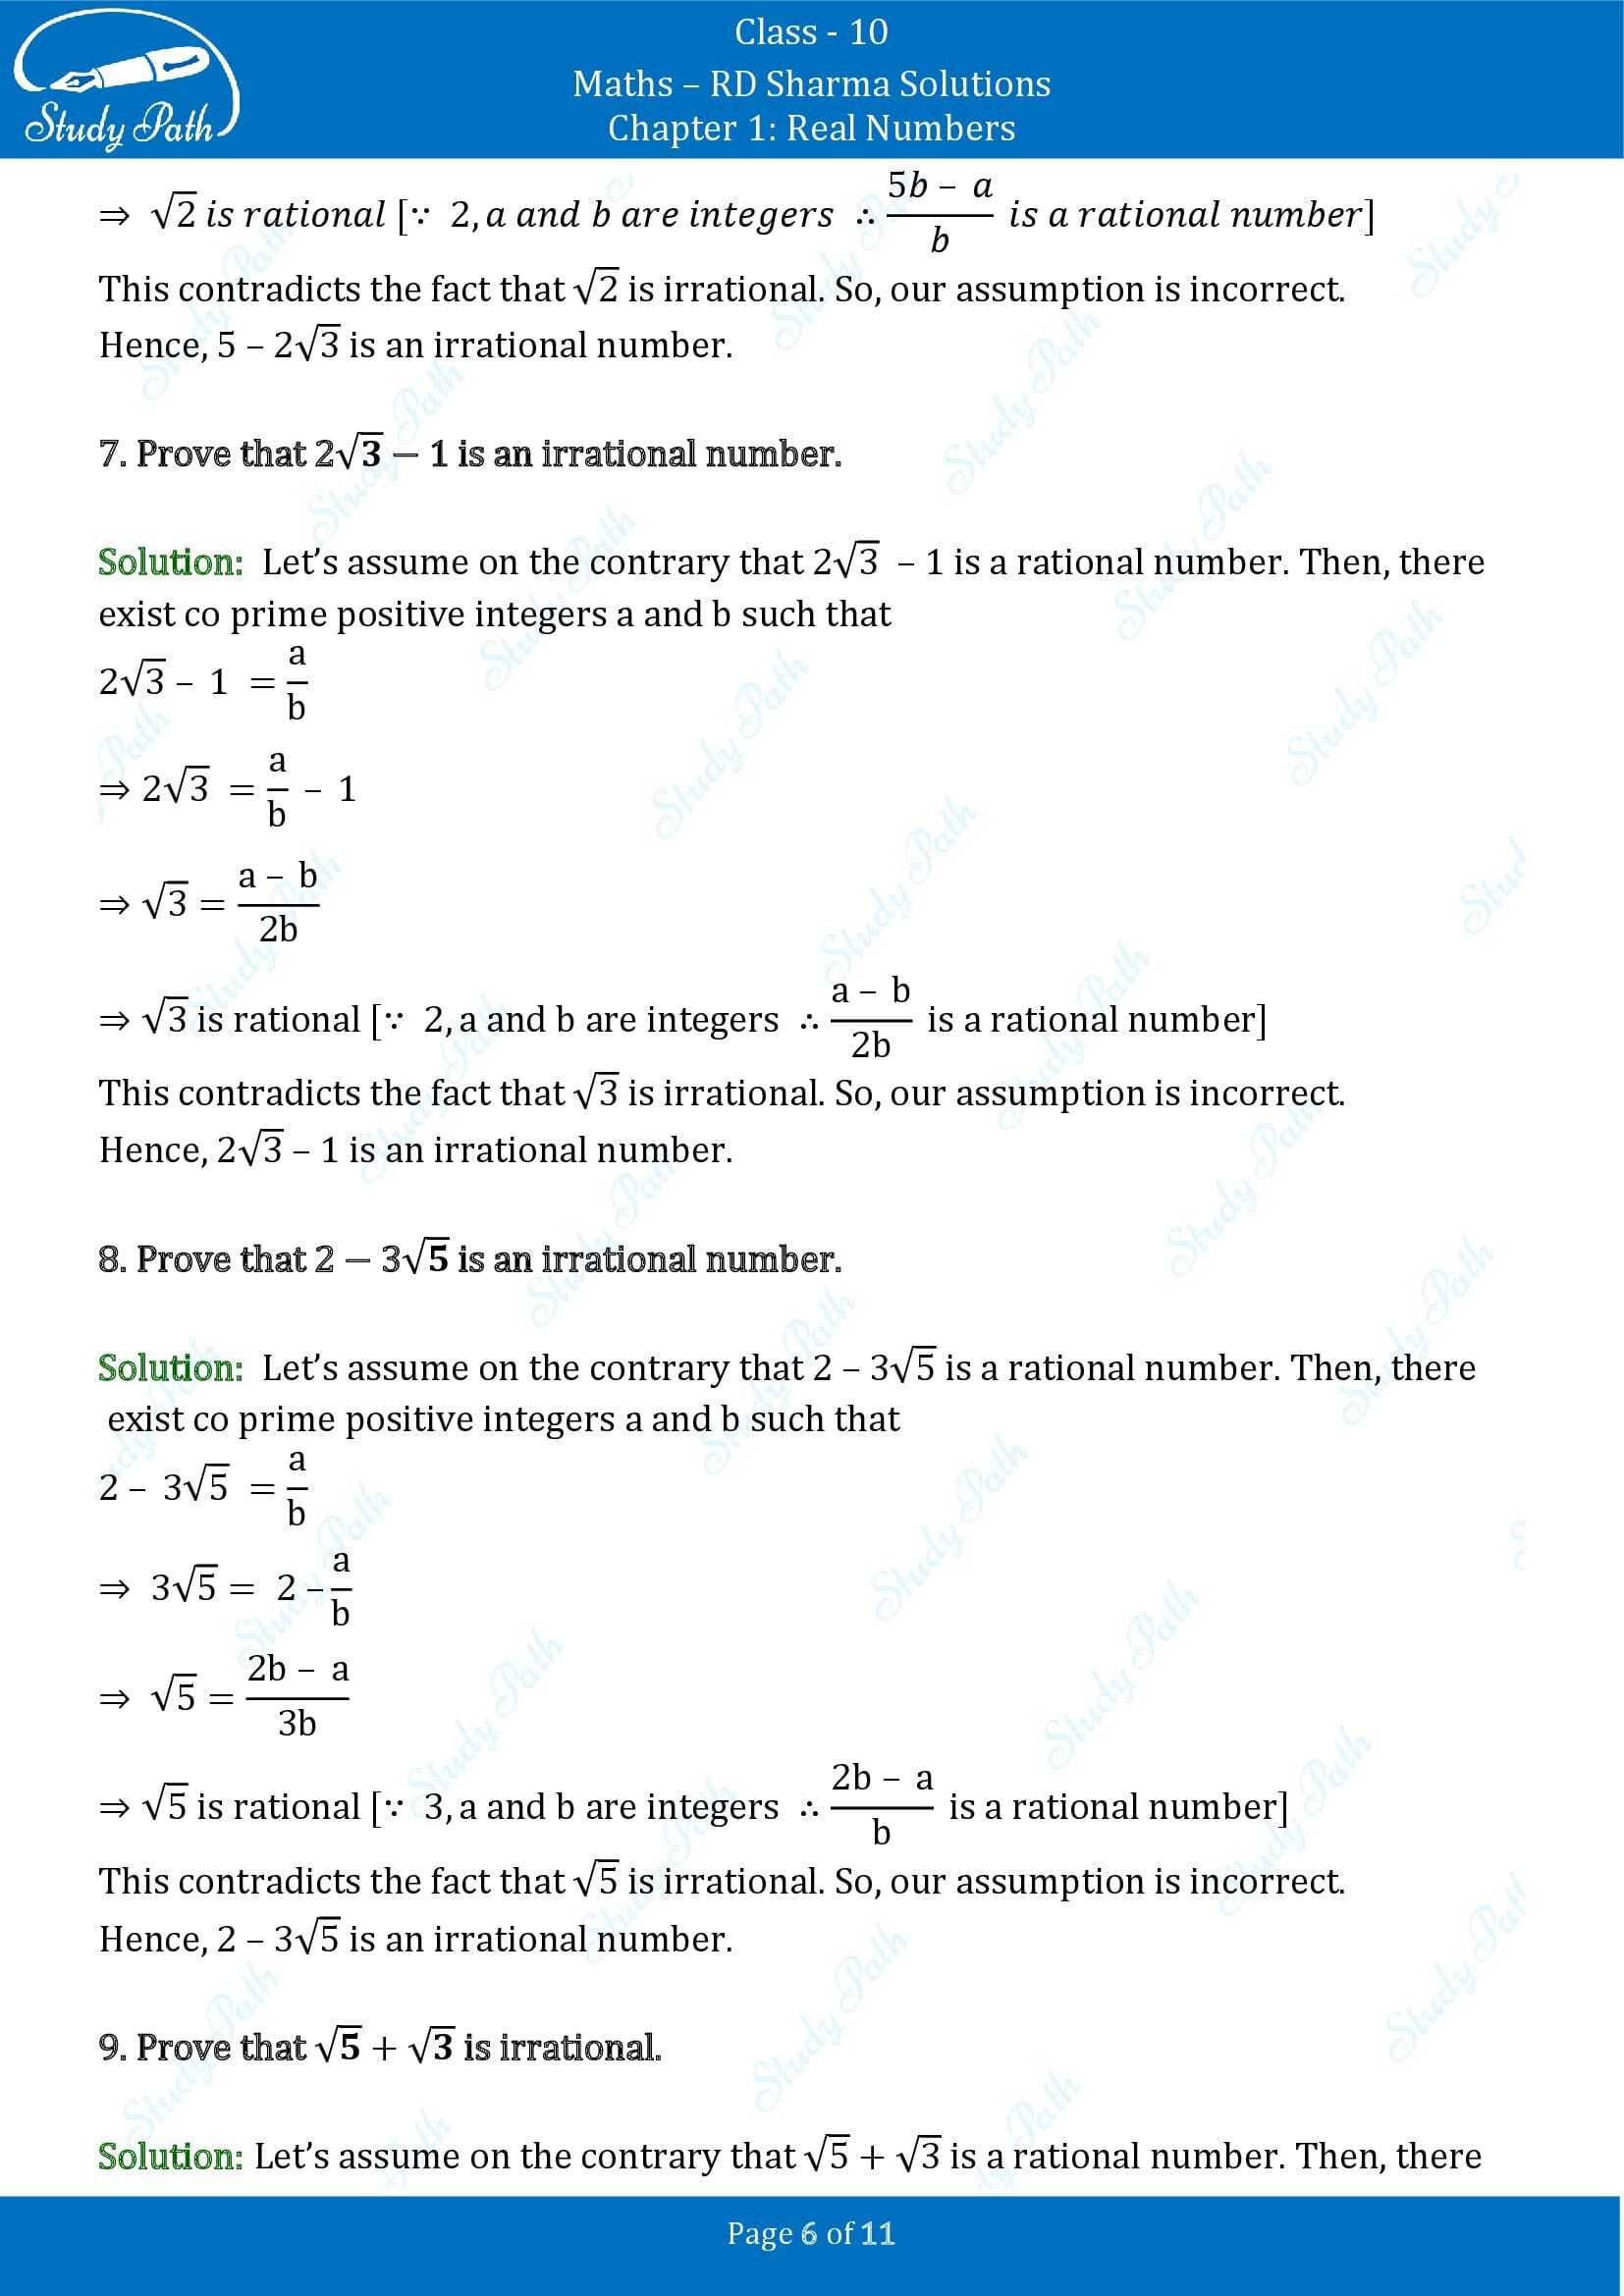 RD Sharma Solutions Class 10 Chapter 1 Real Numbers Exercise 1.5 00006